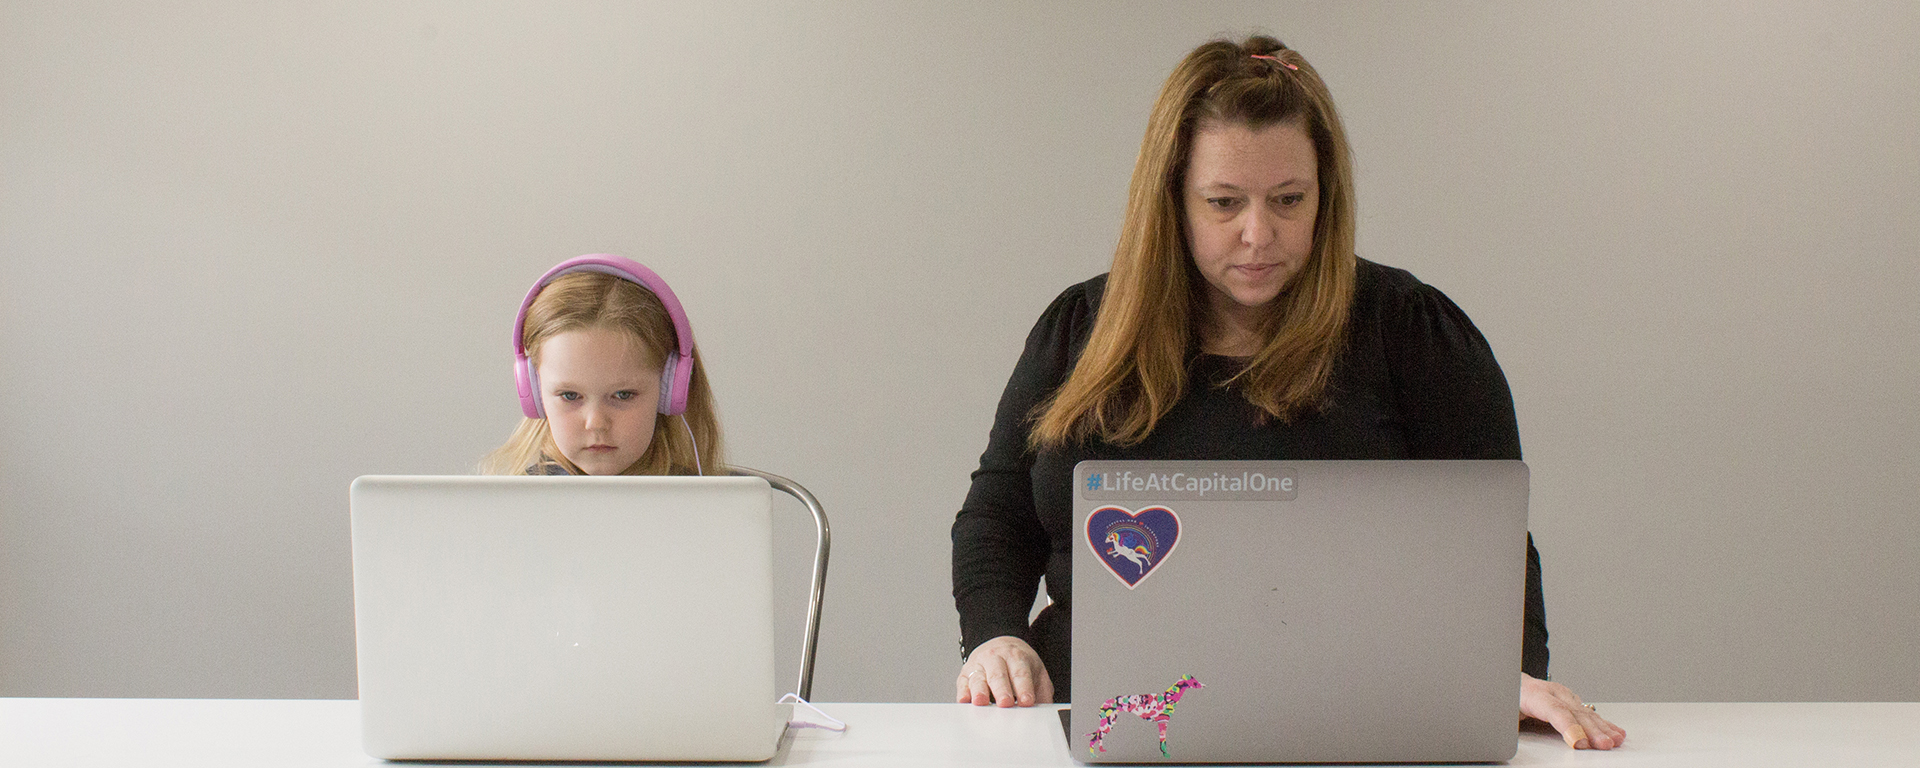 Capital One associate Amanda gives tips on working from home with your kids 